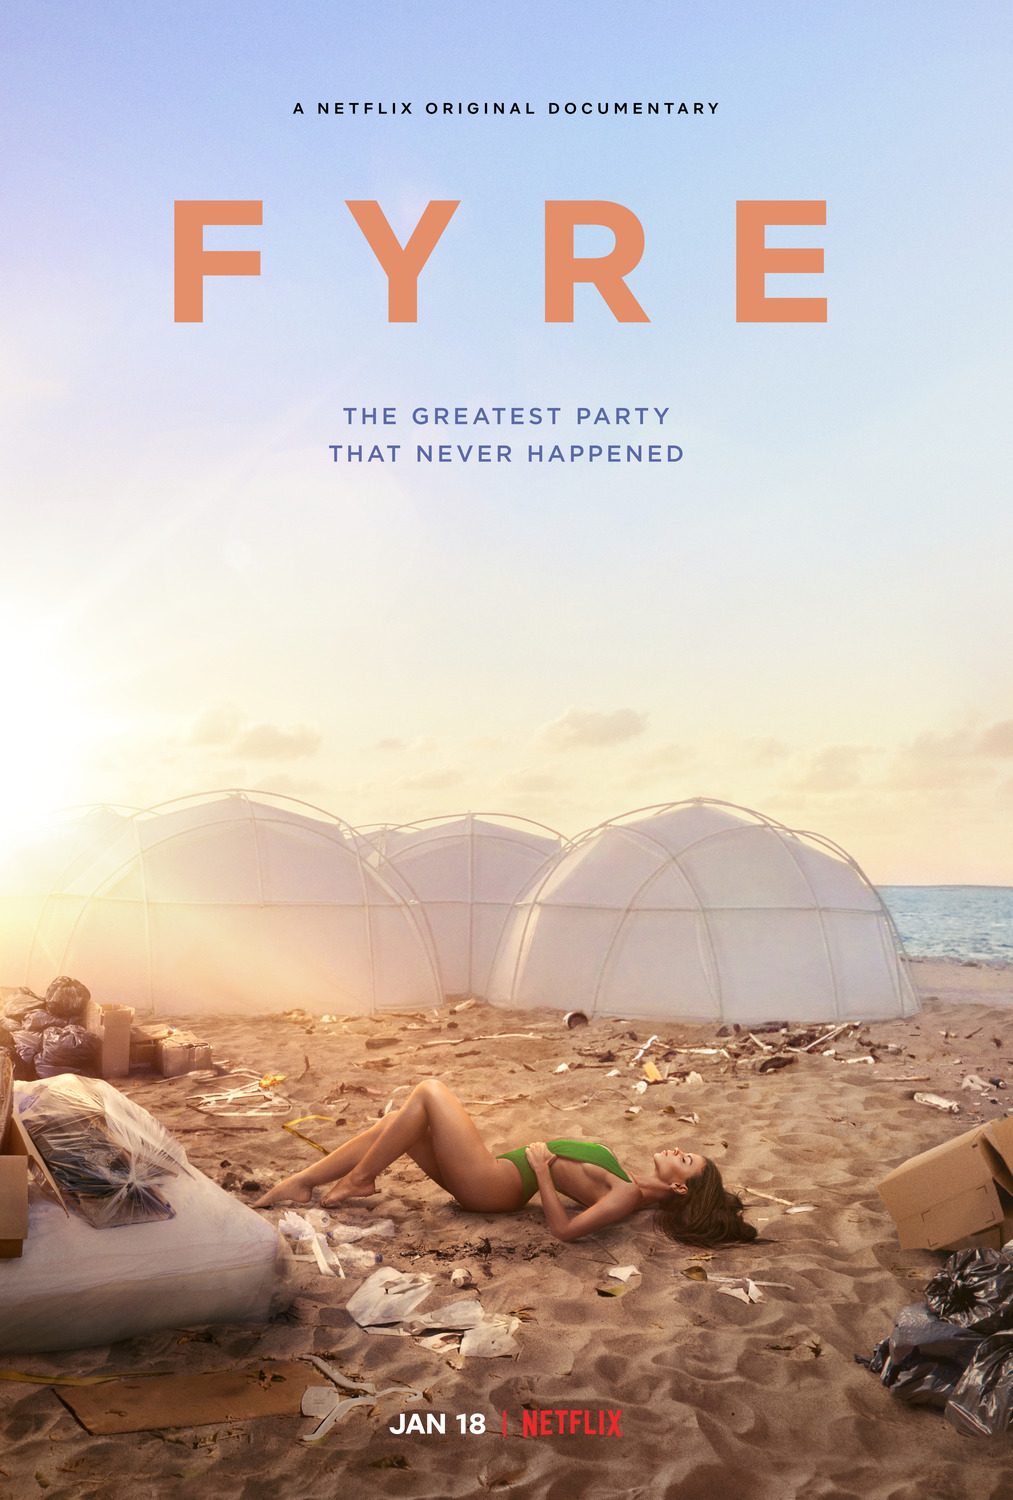 Extra Large TV Poster Image for Fyre 